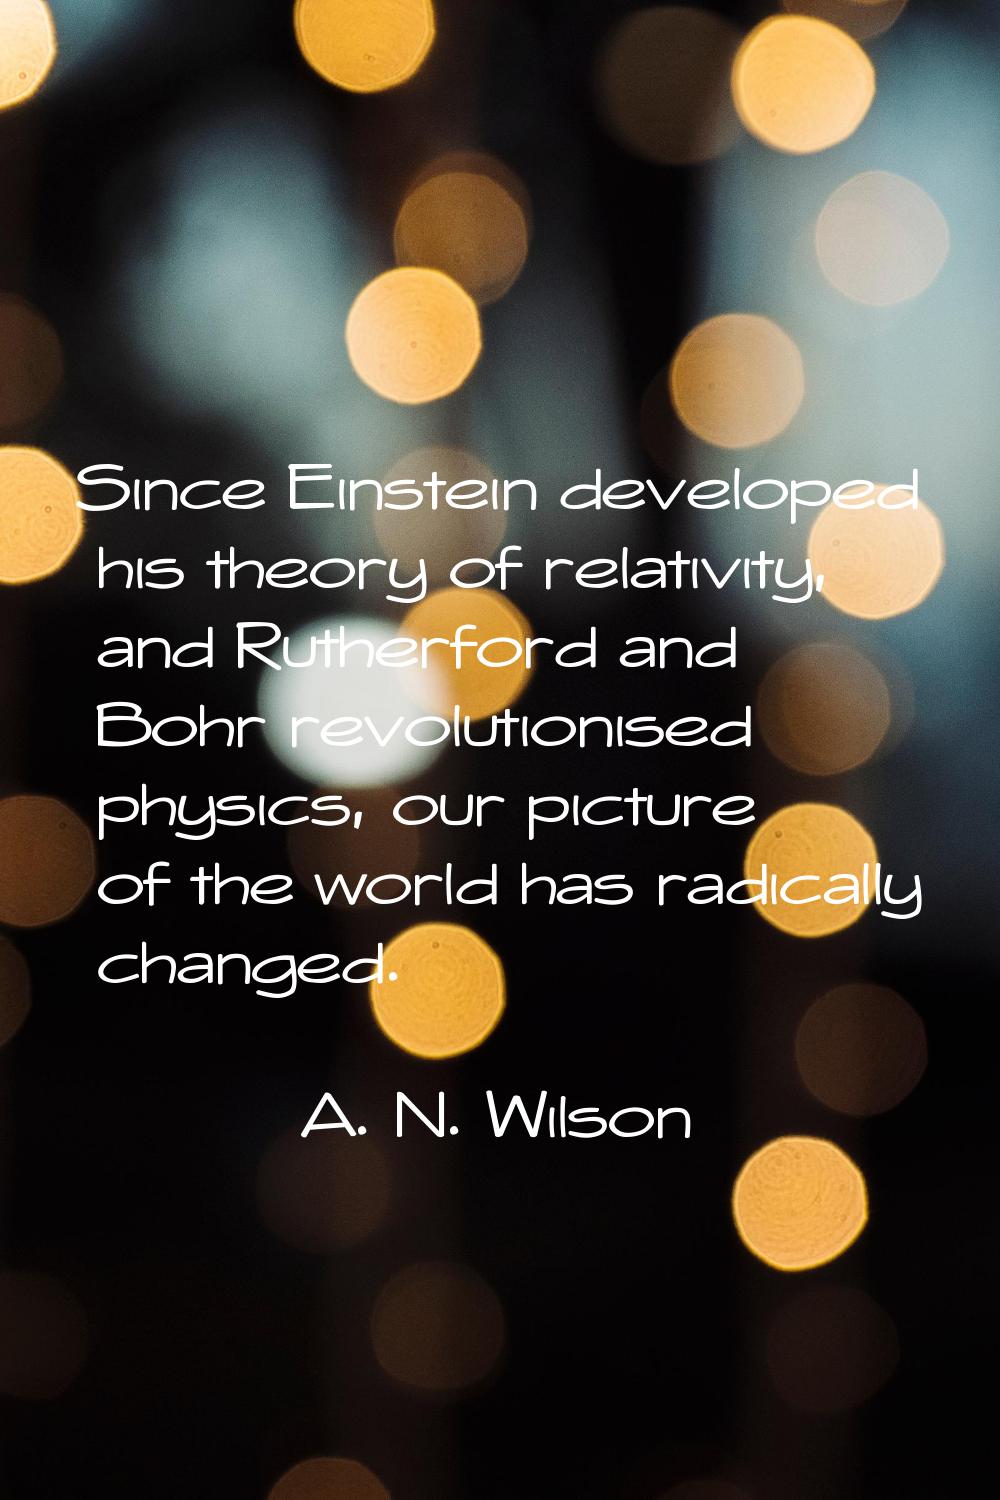 Since Einstein developed his theory of relativity, and Rutherford and Bohr revolutionised physics, 